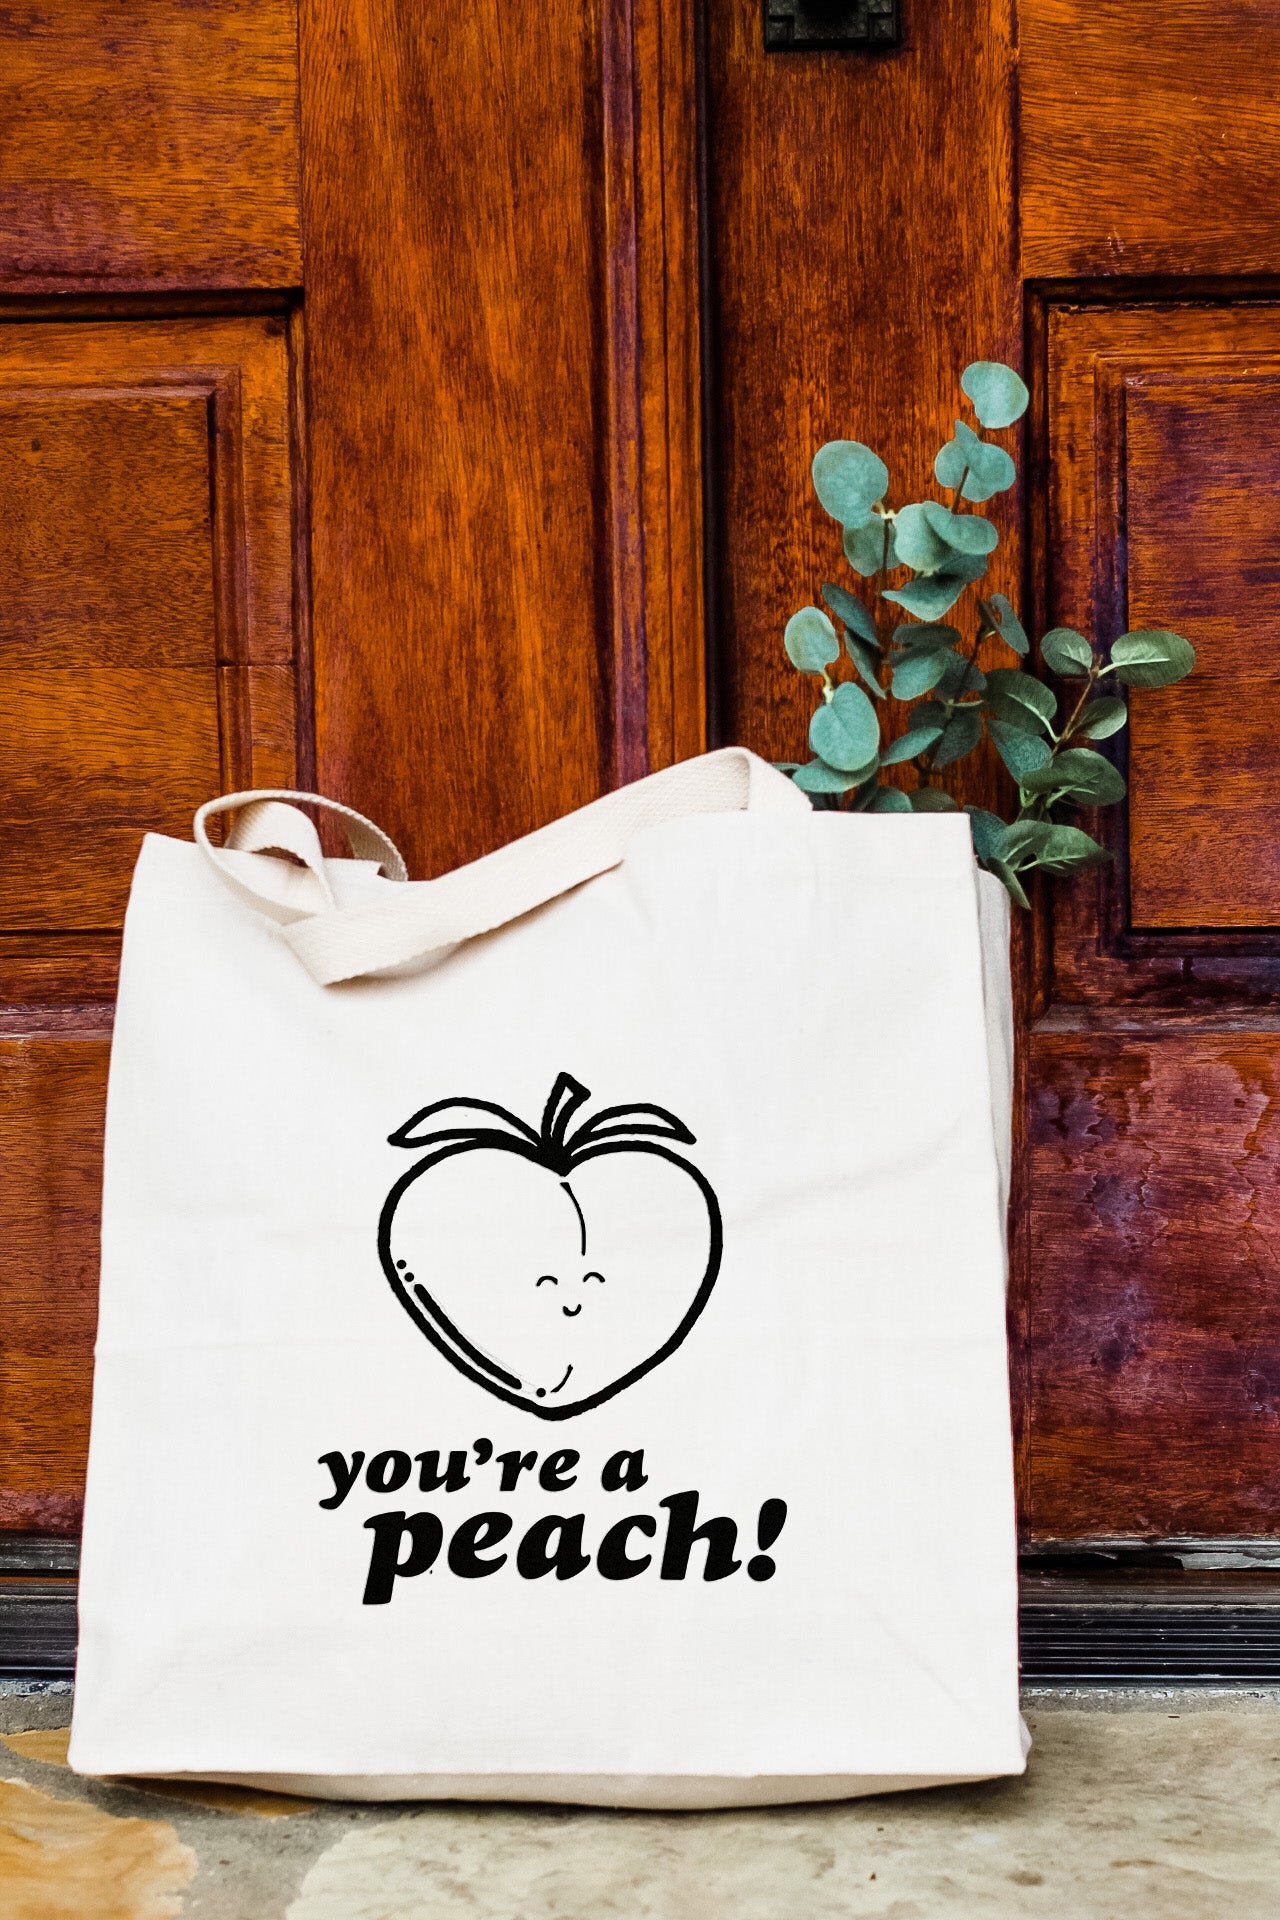 You're a Peach - Tote Bag - MoonlightMakers